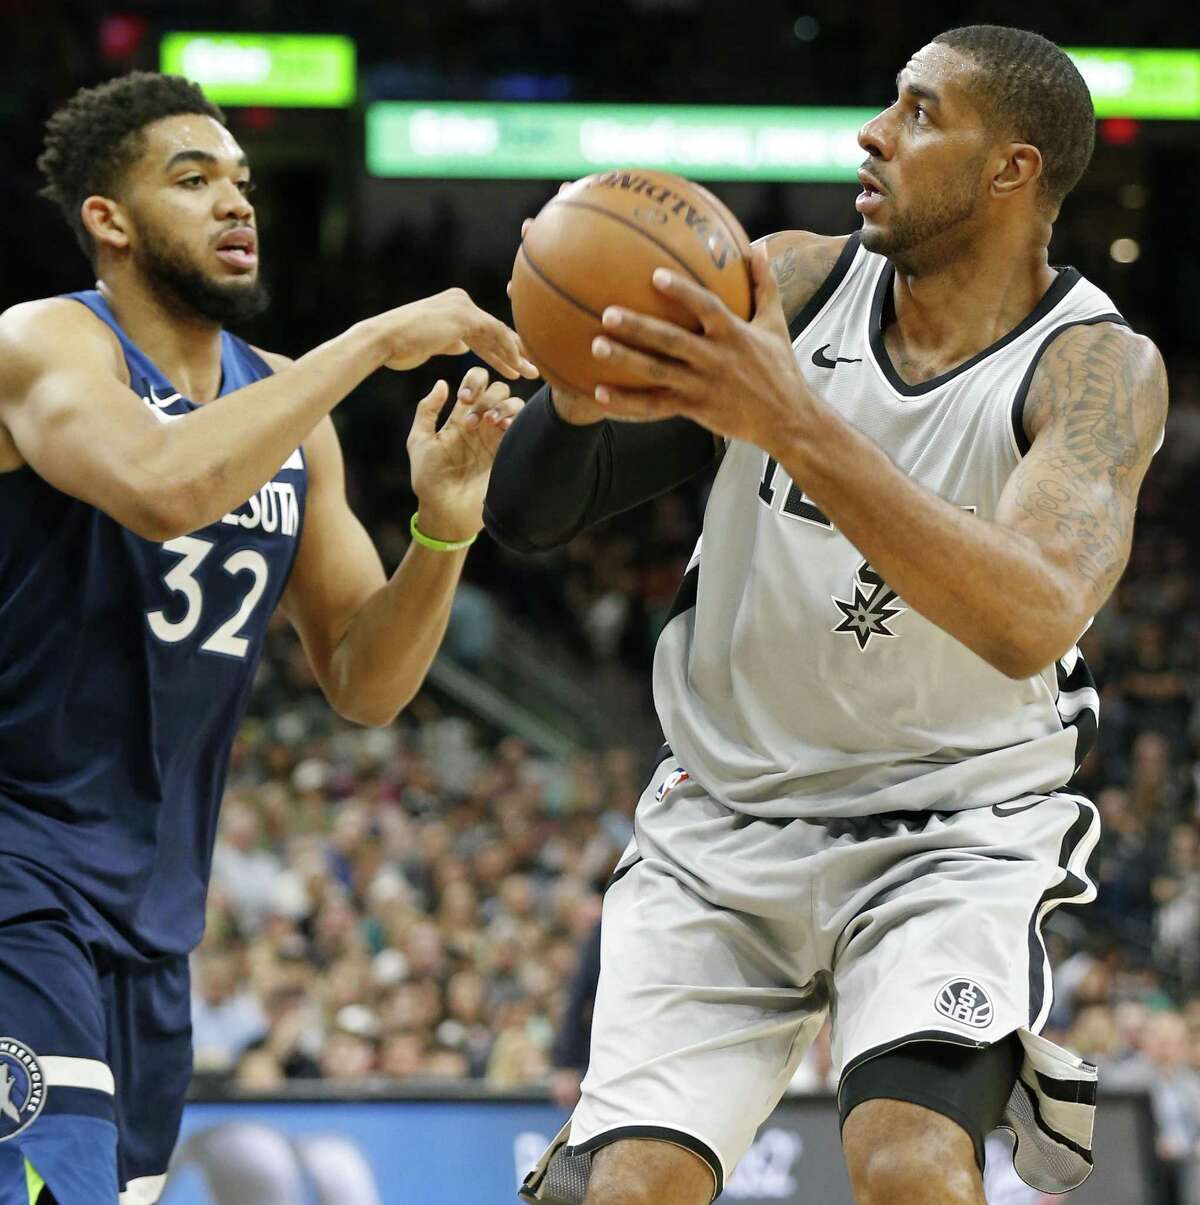 The Spurs’ LaMarcus Aldridge looks for room around Minnesota’s Karl-Anthony Towns during Saturday’s game. Aldridge finished with 39 points and 10 rebounds as the Spurs kept their postseason hopes alive.